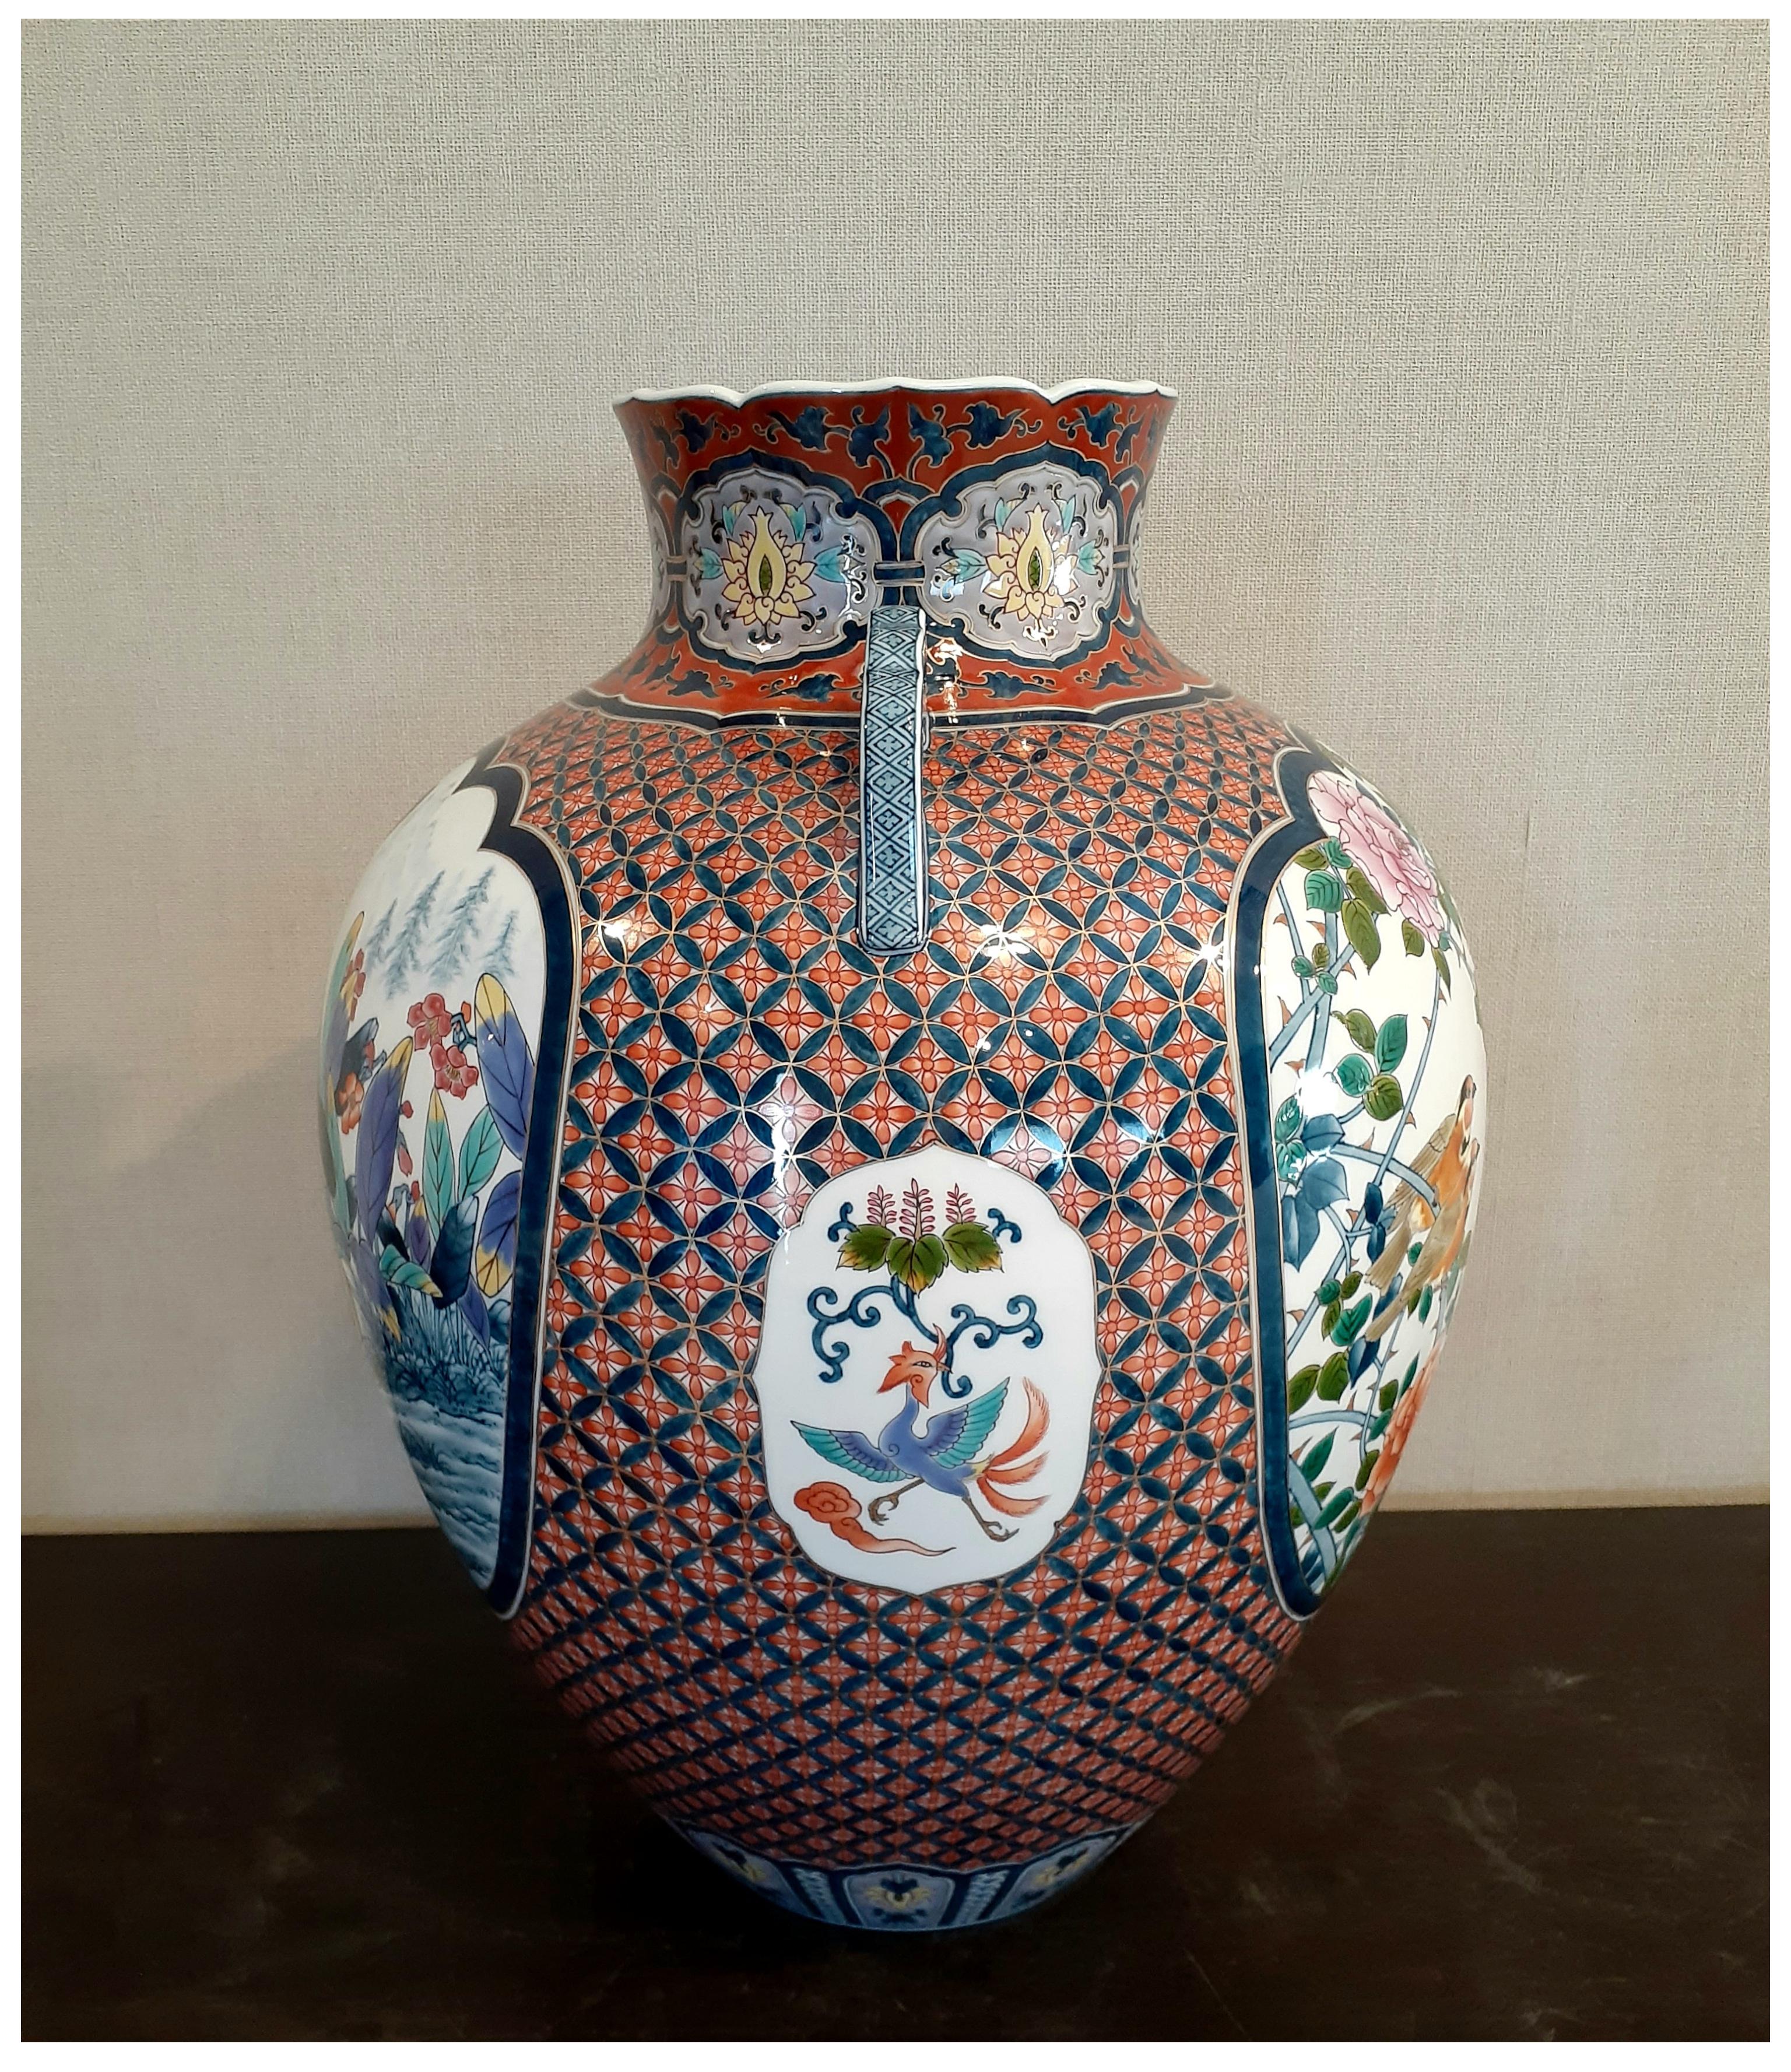 Extraordinary museum-quality contemporary Japanese gilded decorative porcelain vase, intricately in blue, red, green, yellow and orange, on a stunningly shaped body with two graceful handles, a magnificent signed masterpiece by highly acclaimed